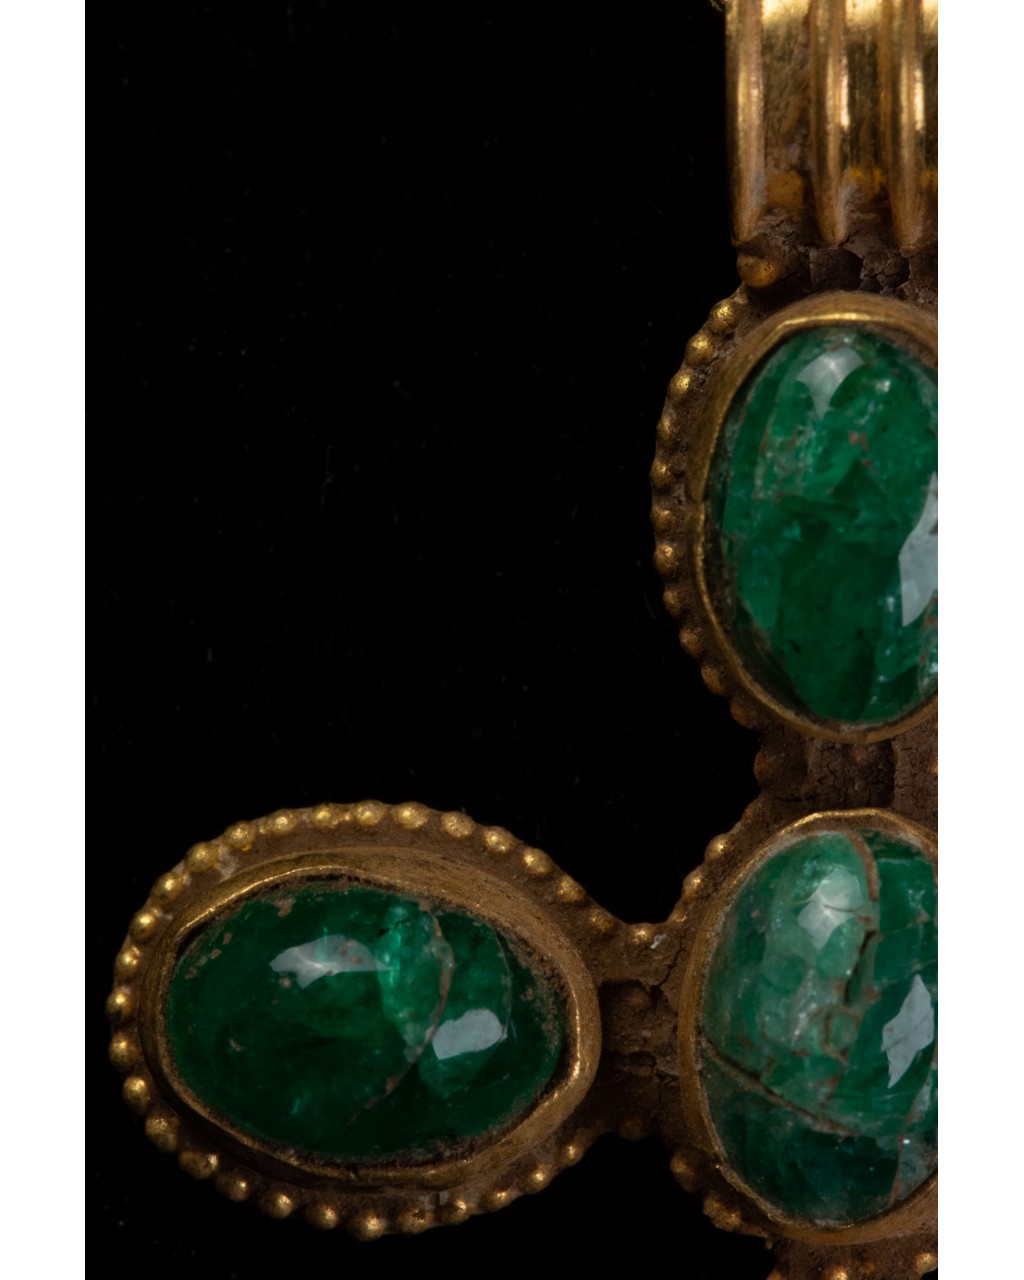 LATE MEDIEVAL GOLD CROSS WITH EMERALDS - Image 4 of 5